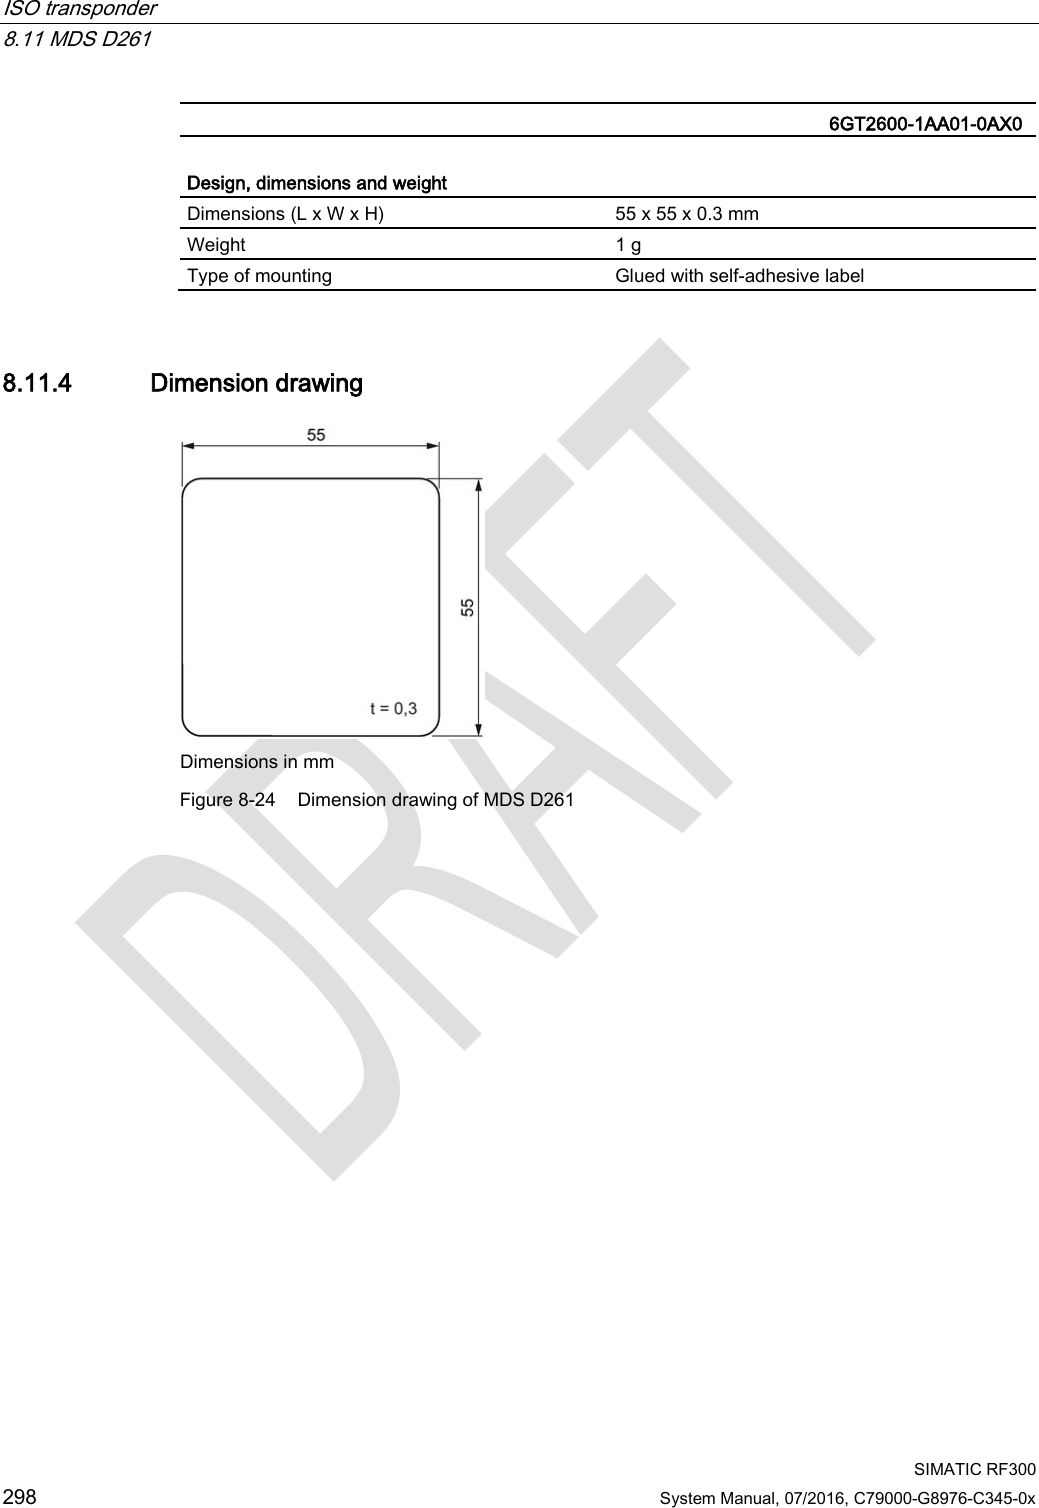 ISO transponder   8.11 MDS D261  SIMATIC RF300 298 System Manual, 07/2016, C79000-G8976-C345-0x   6GT2600-1AA01-0AX0  Design, dimensions and weight  Dimensions (L x W x H) 55 x 55 x 0.3 mm Weight 1 g Type of mounting Glued with self-adhesive label 8.11.4 Dimension drawing  Dimensions in mm  Figure 8-24 Dimension drawing of MDS D261  